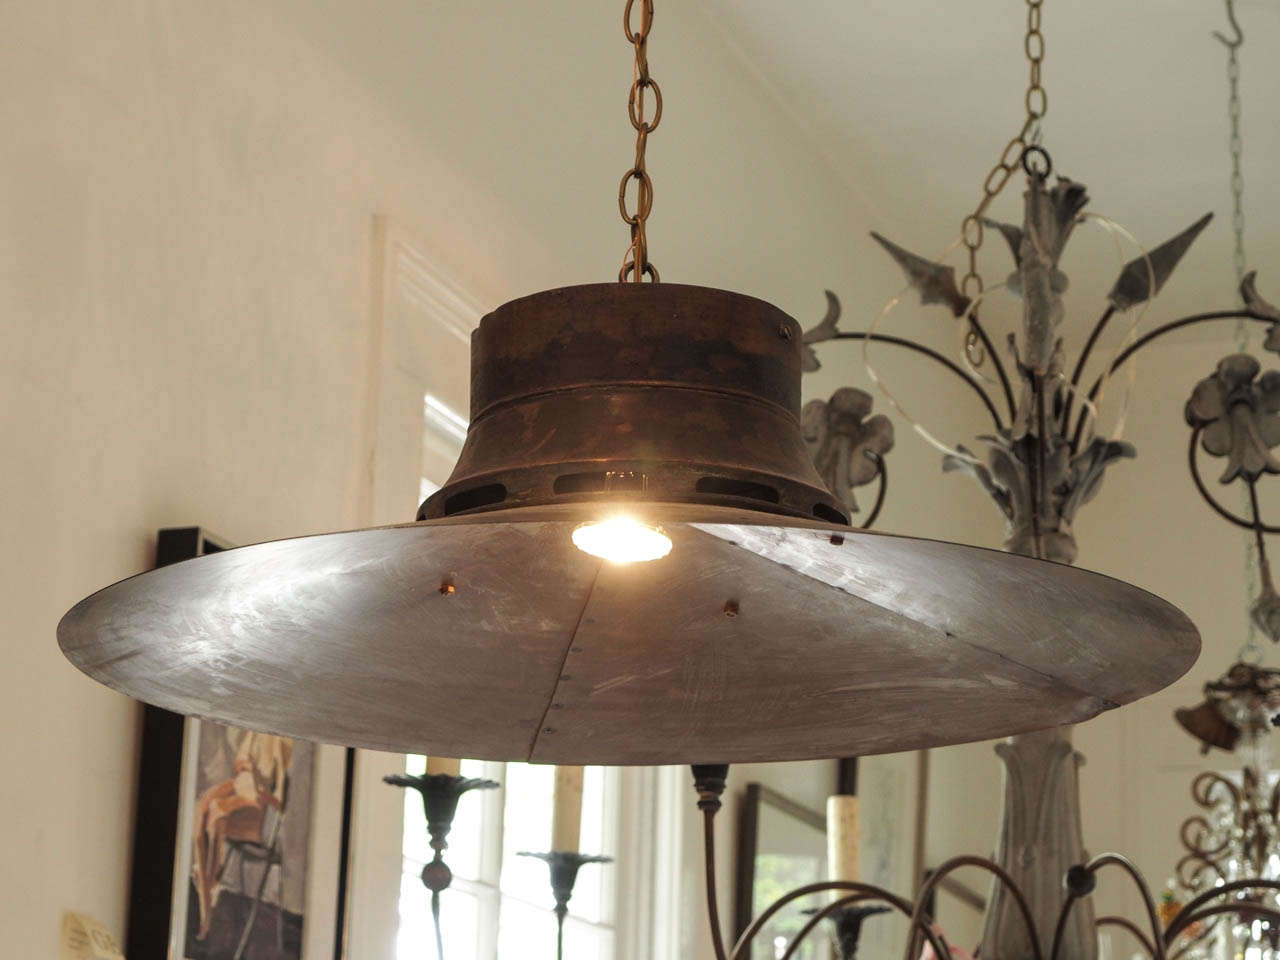 Late 19th century Copper pendant lights from a Parisian torrefacteur(coffee roaster.)
6 available.